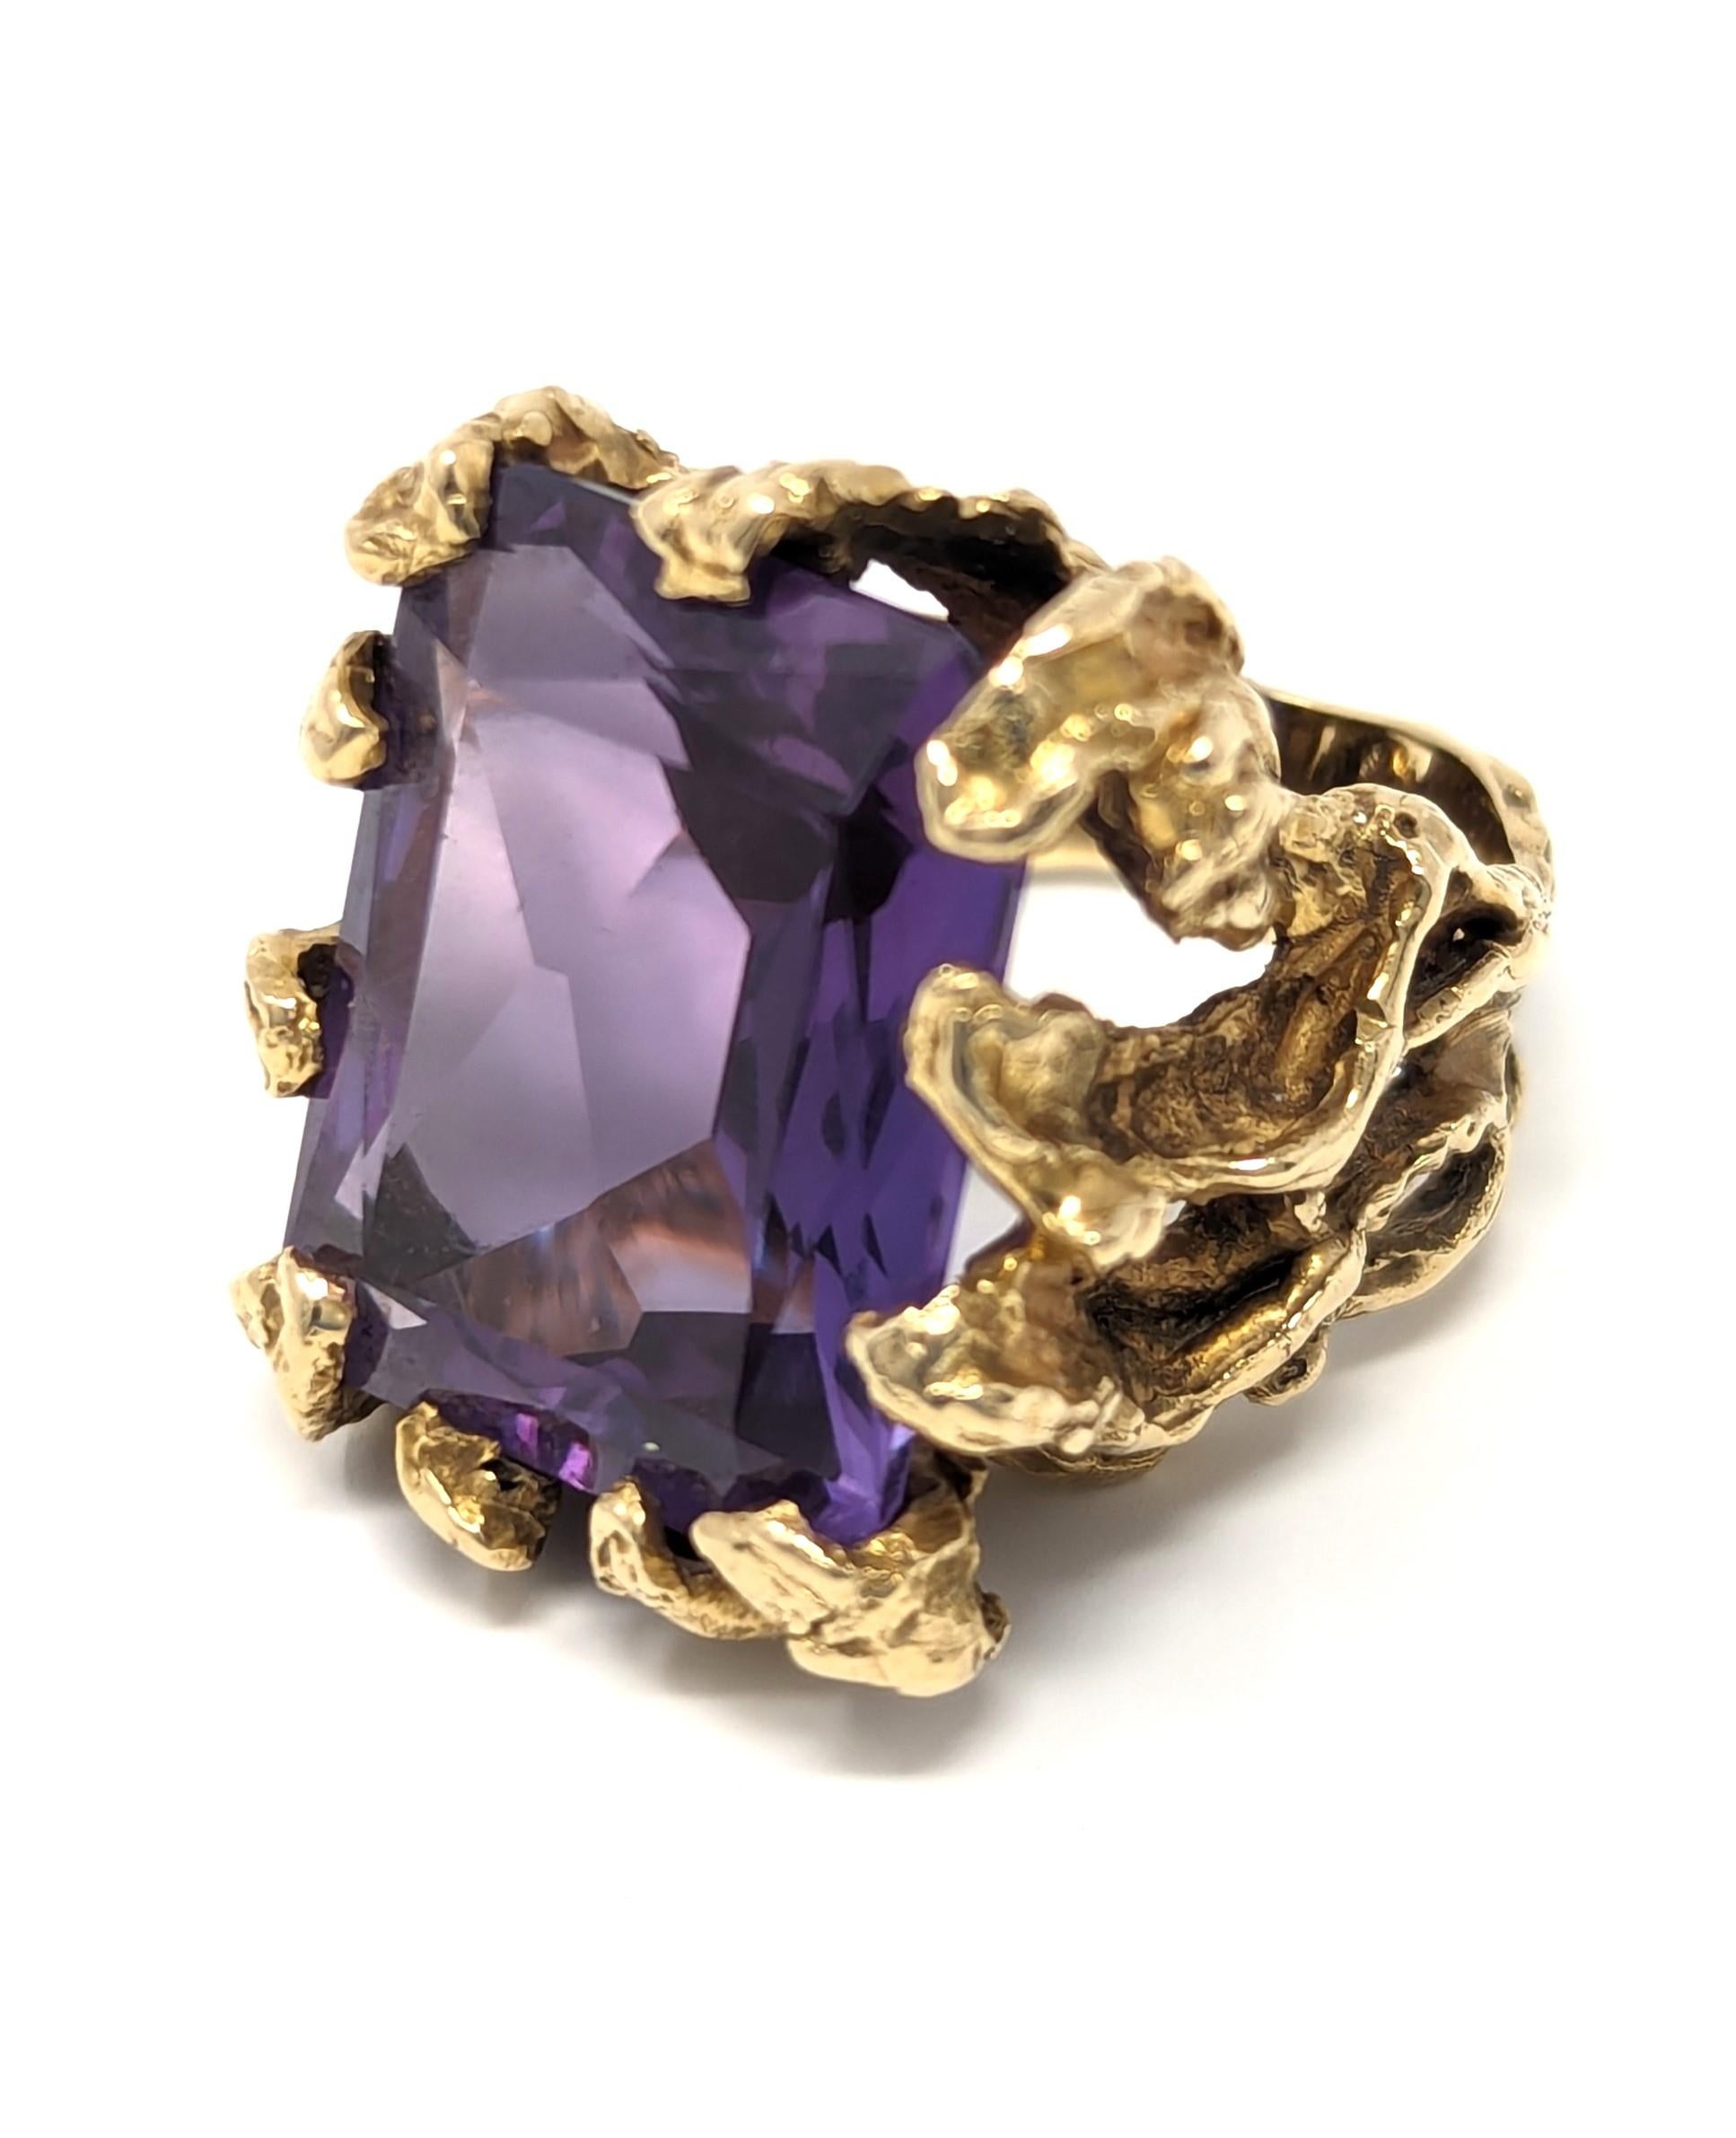 Vintage 14k Ring Color Change Sapphire Purple Brutalist Freeform Size 6.75 In Good Condition For Sale In Greer, SC